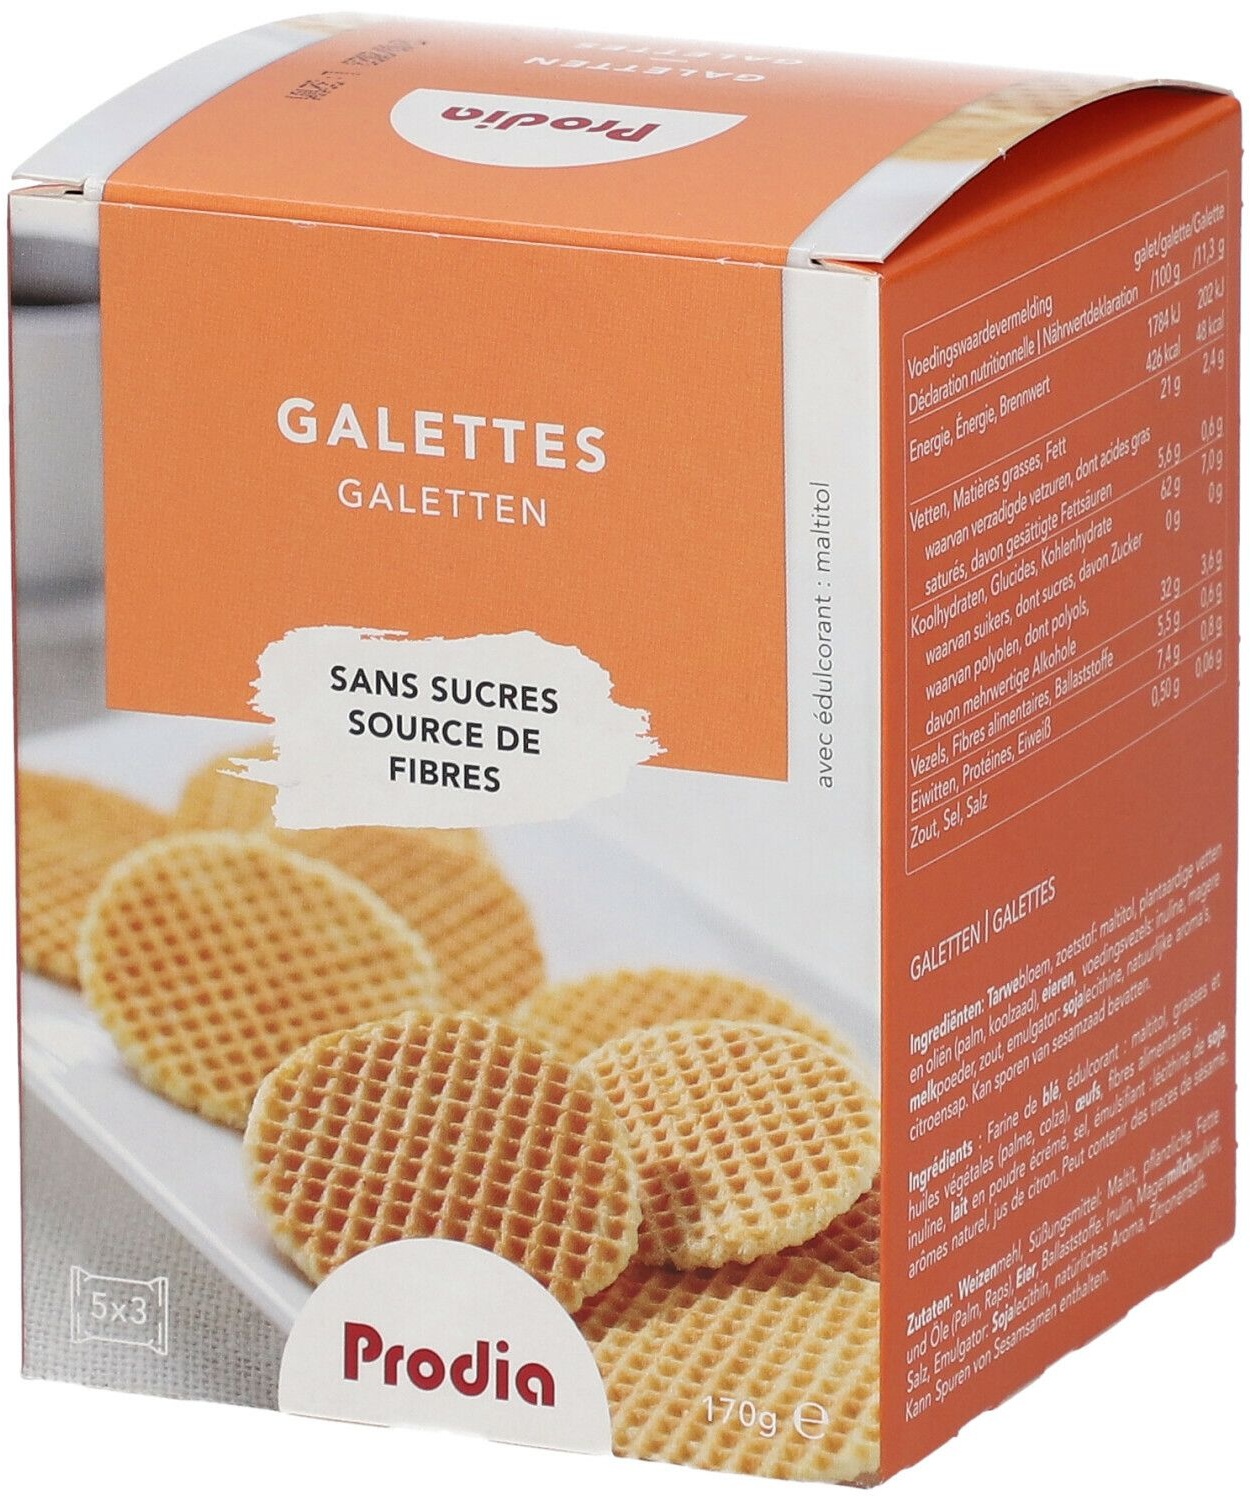 Prodia Galettes 170 g Cookies